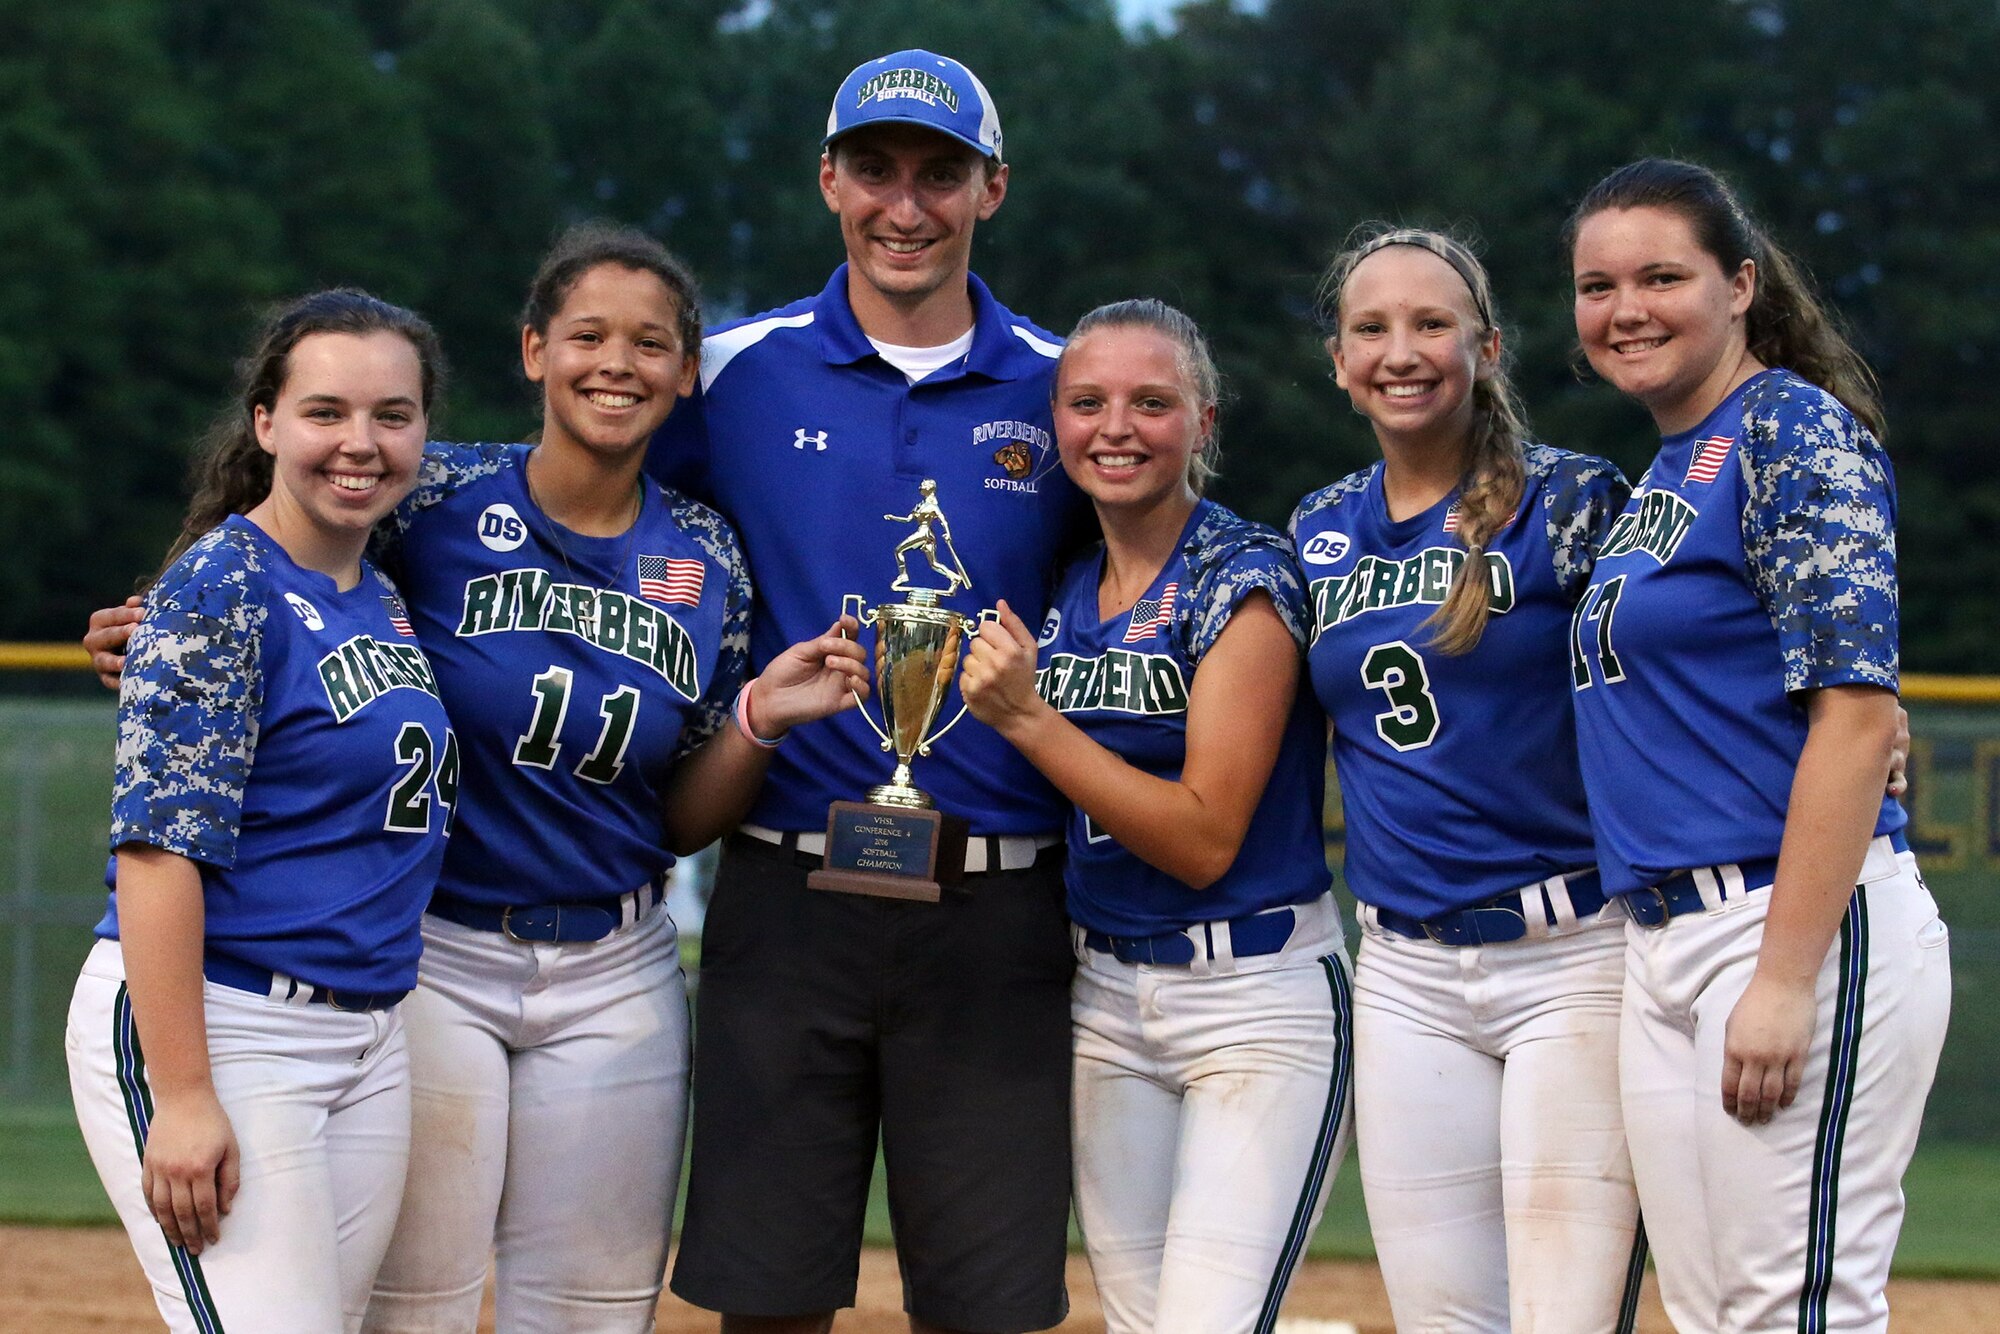 Senior Airman Robert “Scott” Thomas, a traditional reservist with the 718th Intelligence Squadron, lead the Riverbend High School softball team to a record of 19-2, winning the Commonwealth District Championship and winning the first softball Regional Playoff game in school history. Due to their great season, Thomas was awarded District Coach of the Year.  (Courtesy photo)